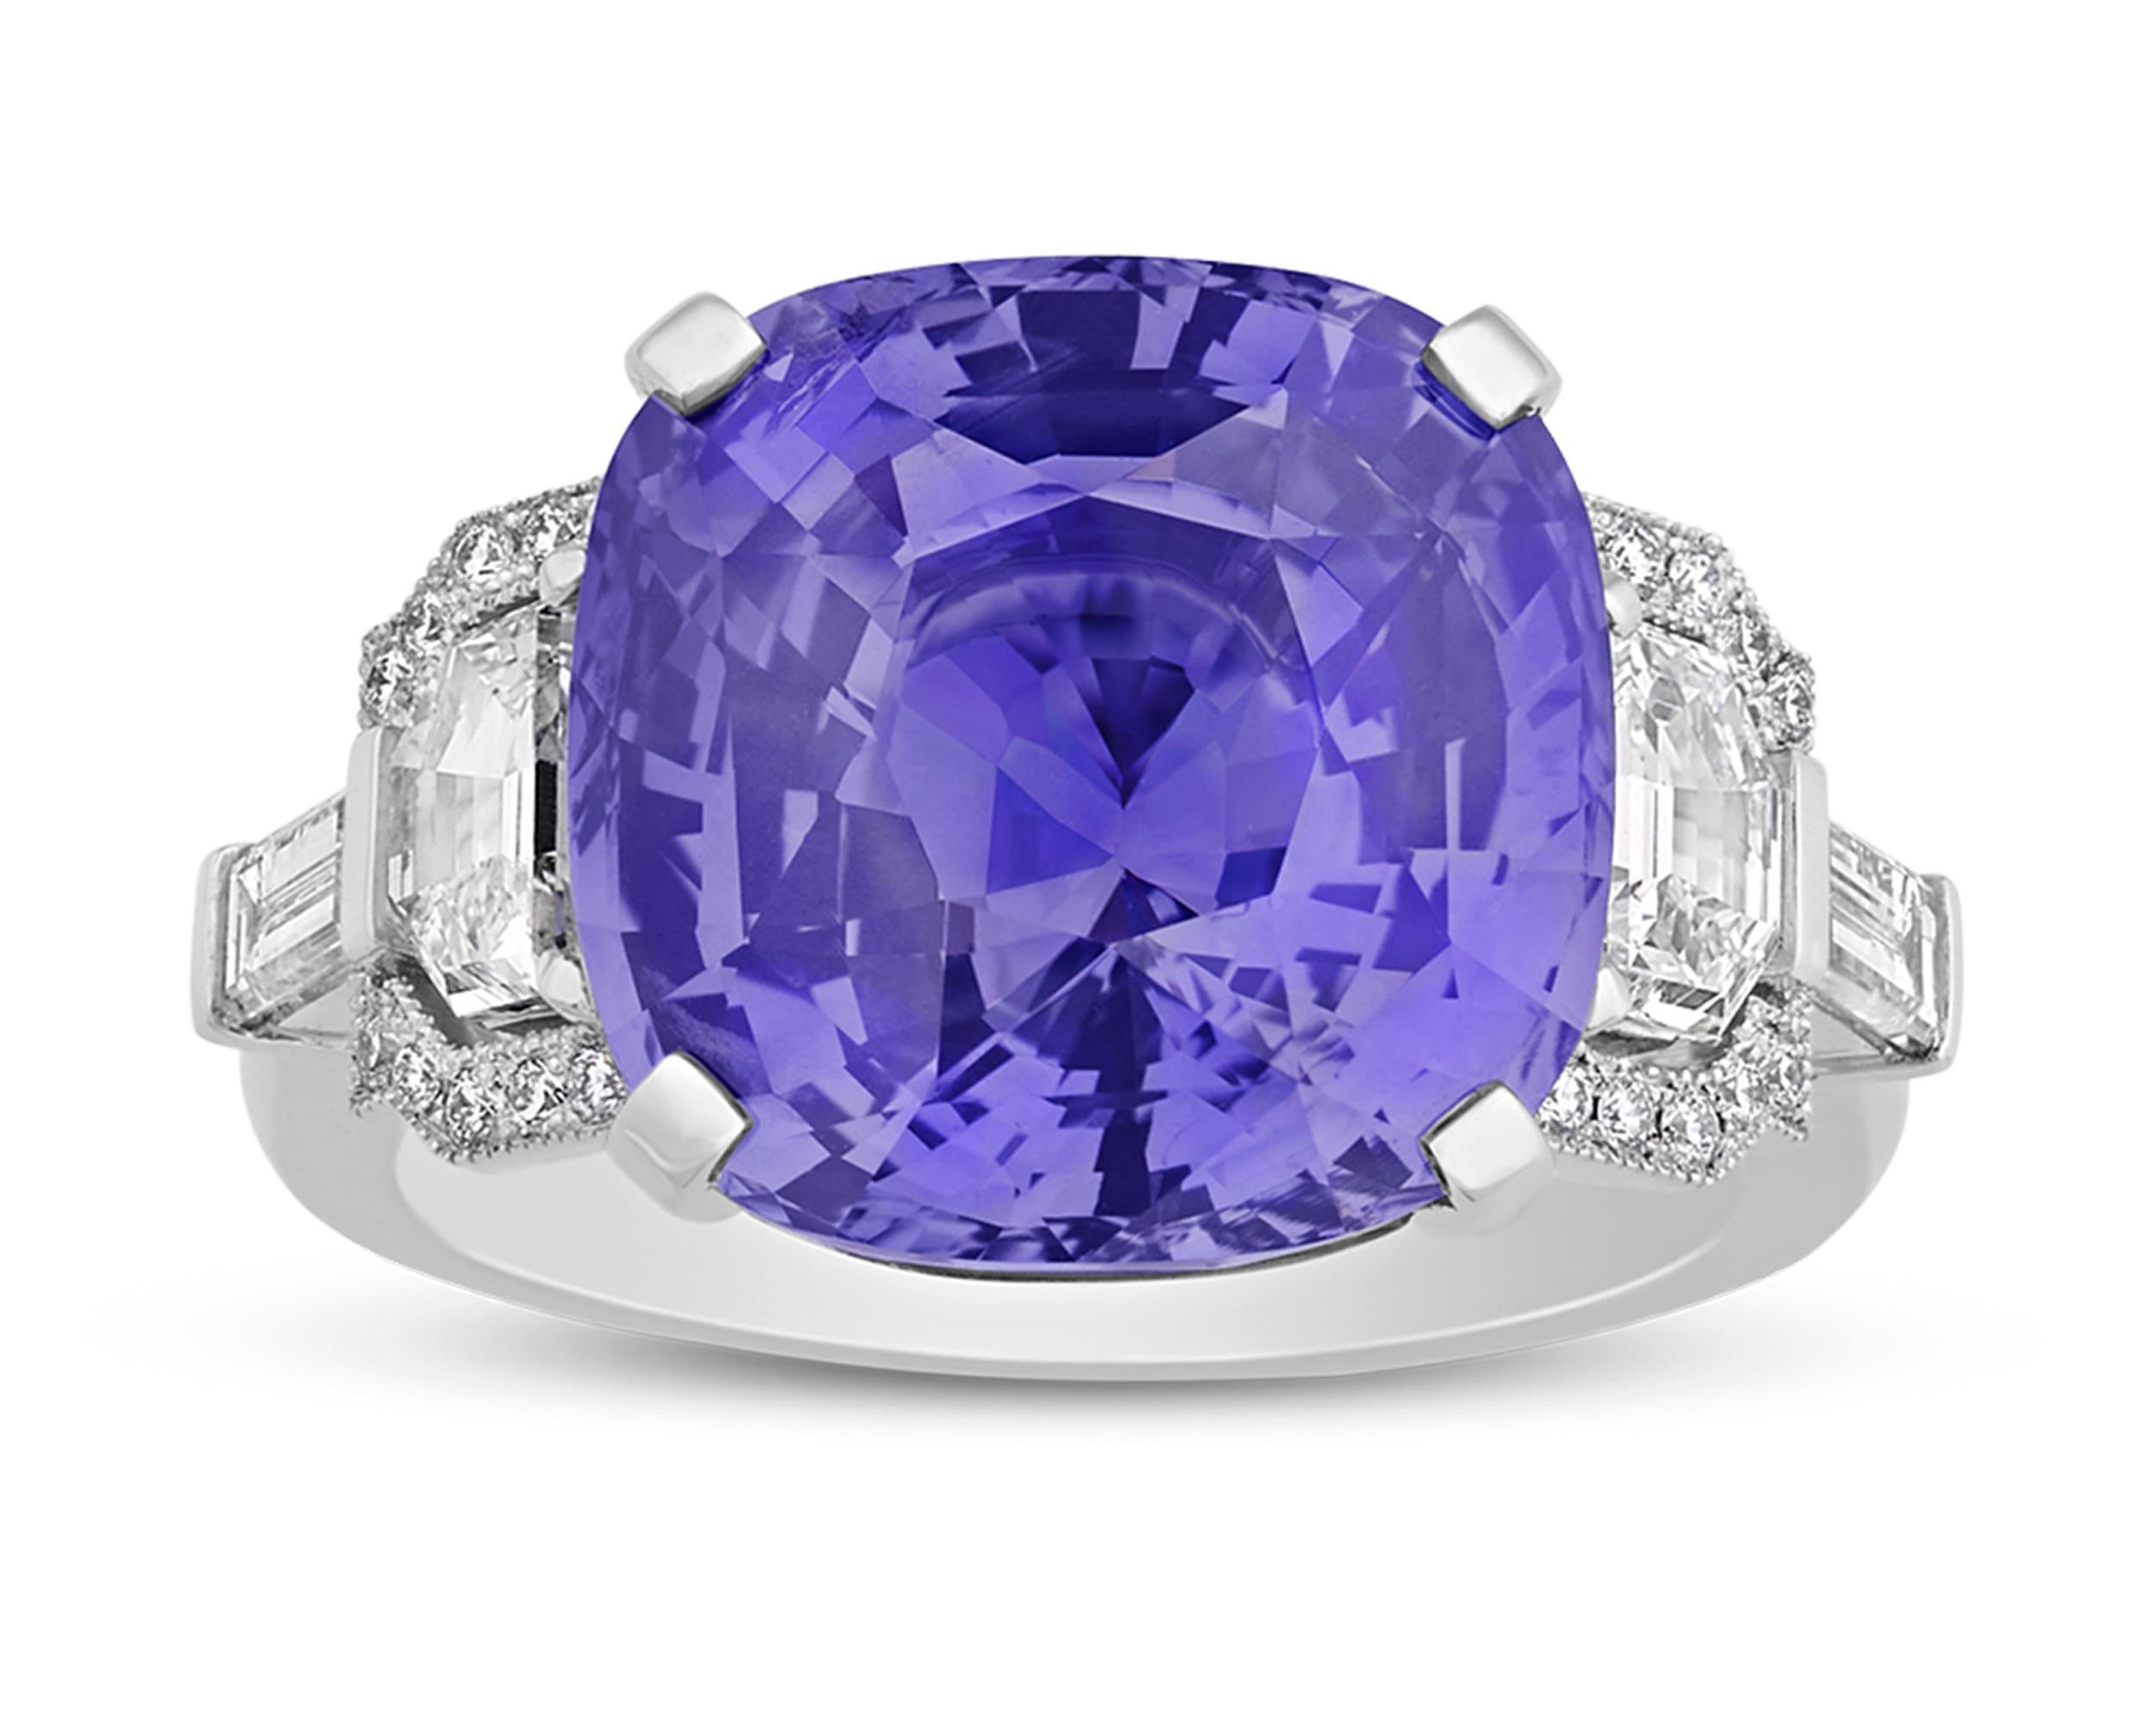 This breathtaking ring by the legendary Raymond Yard features an 11.02-carat violet sapphire at its center. Violet is one of the rarest sapphire colors, and the rich royal hue and impressive size of this stone make it even more remarkable. Flanked